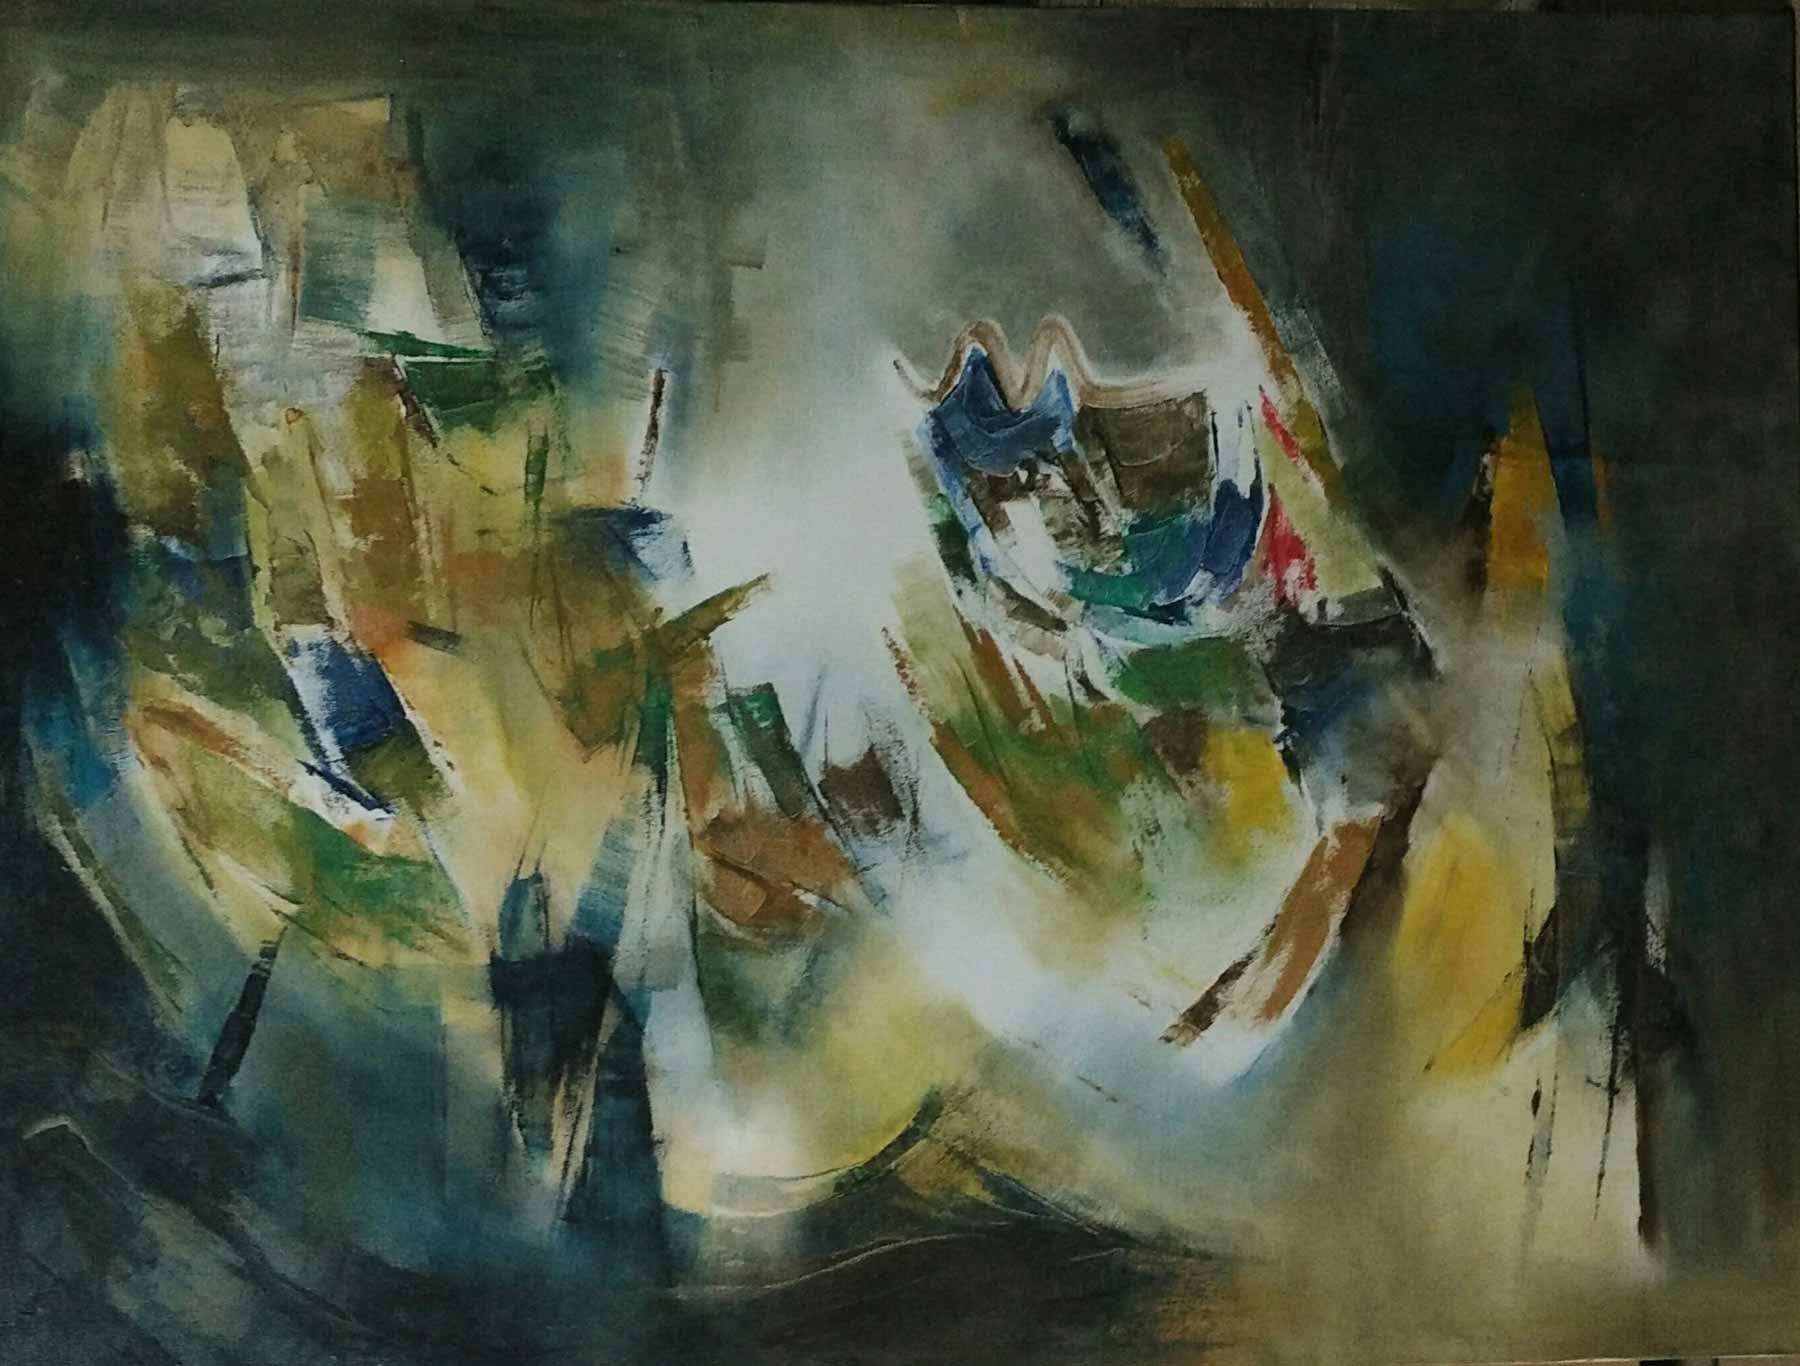 Abstract Painting with Oil on Canvas "Untitled-5" art by Mansing Katkar